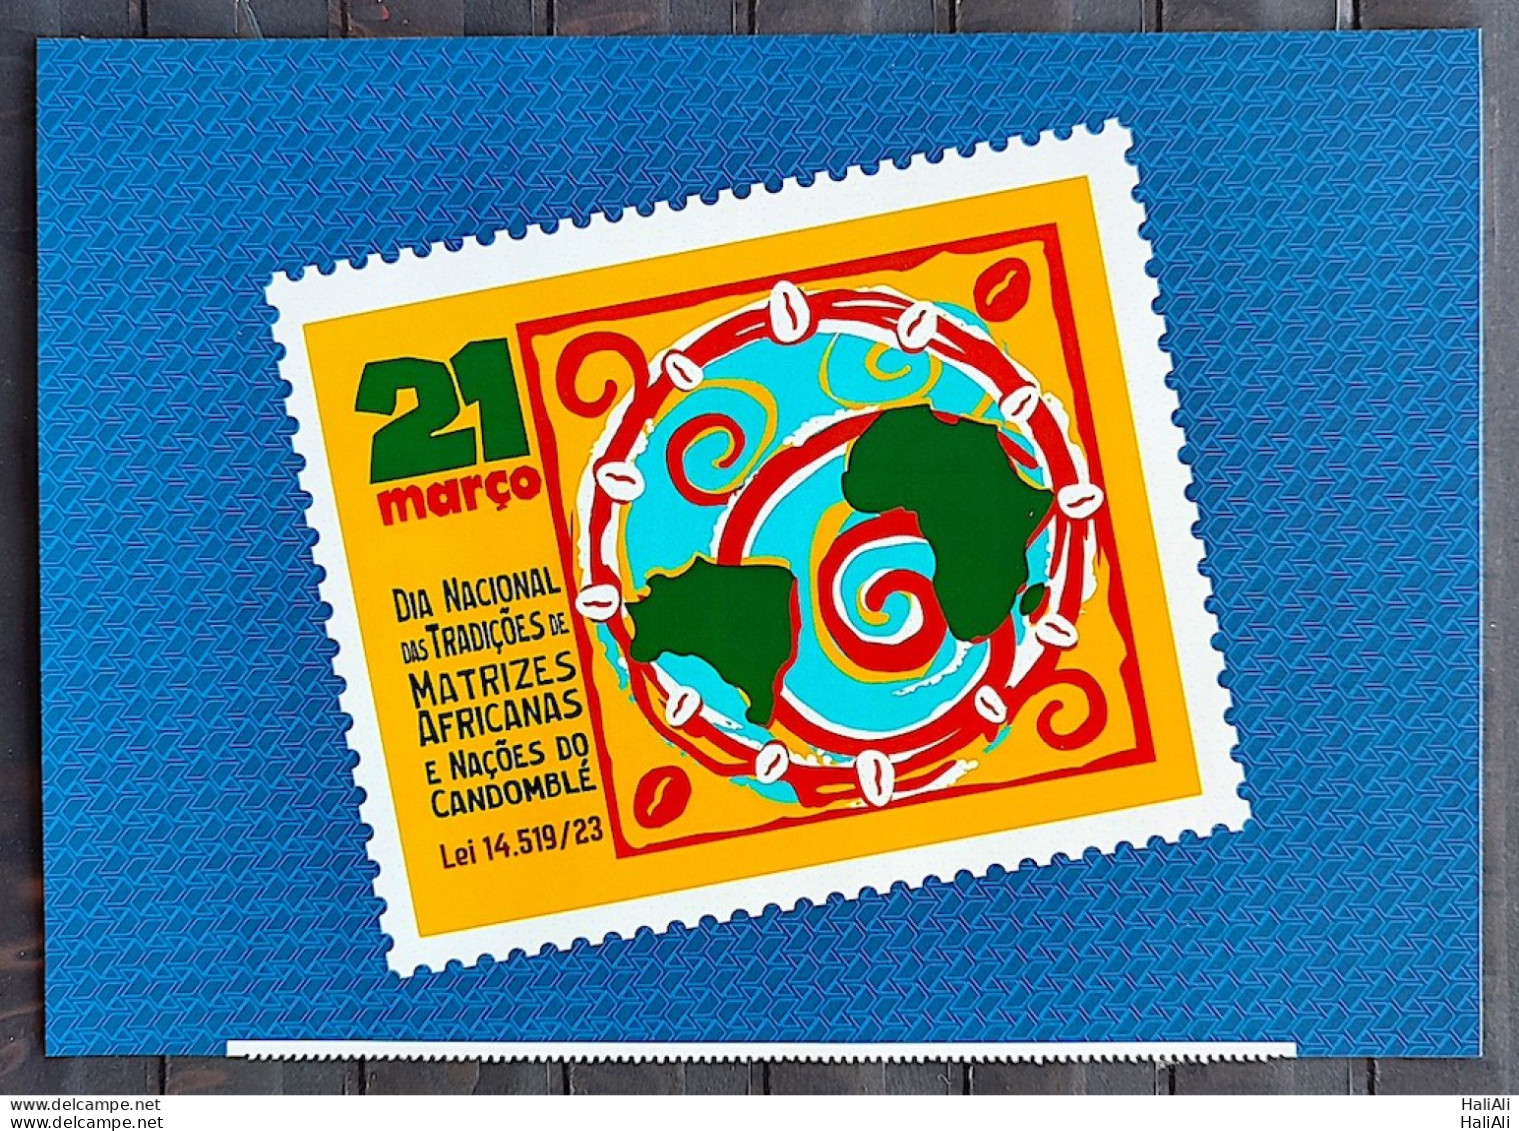 SI 06 Vignette Brazil Institutional Stamp Traditions Of African Matrices And Candomble Nations Map 2023 - Personnalisés